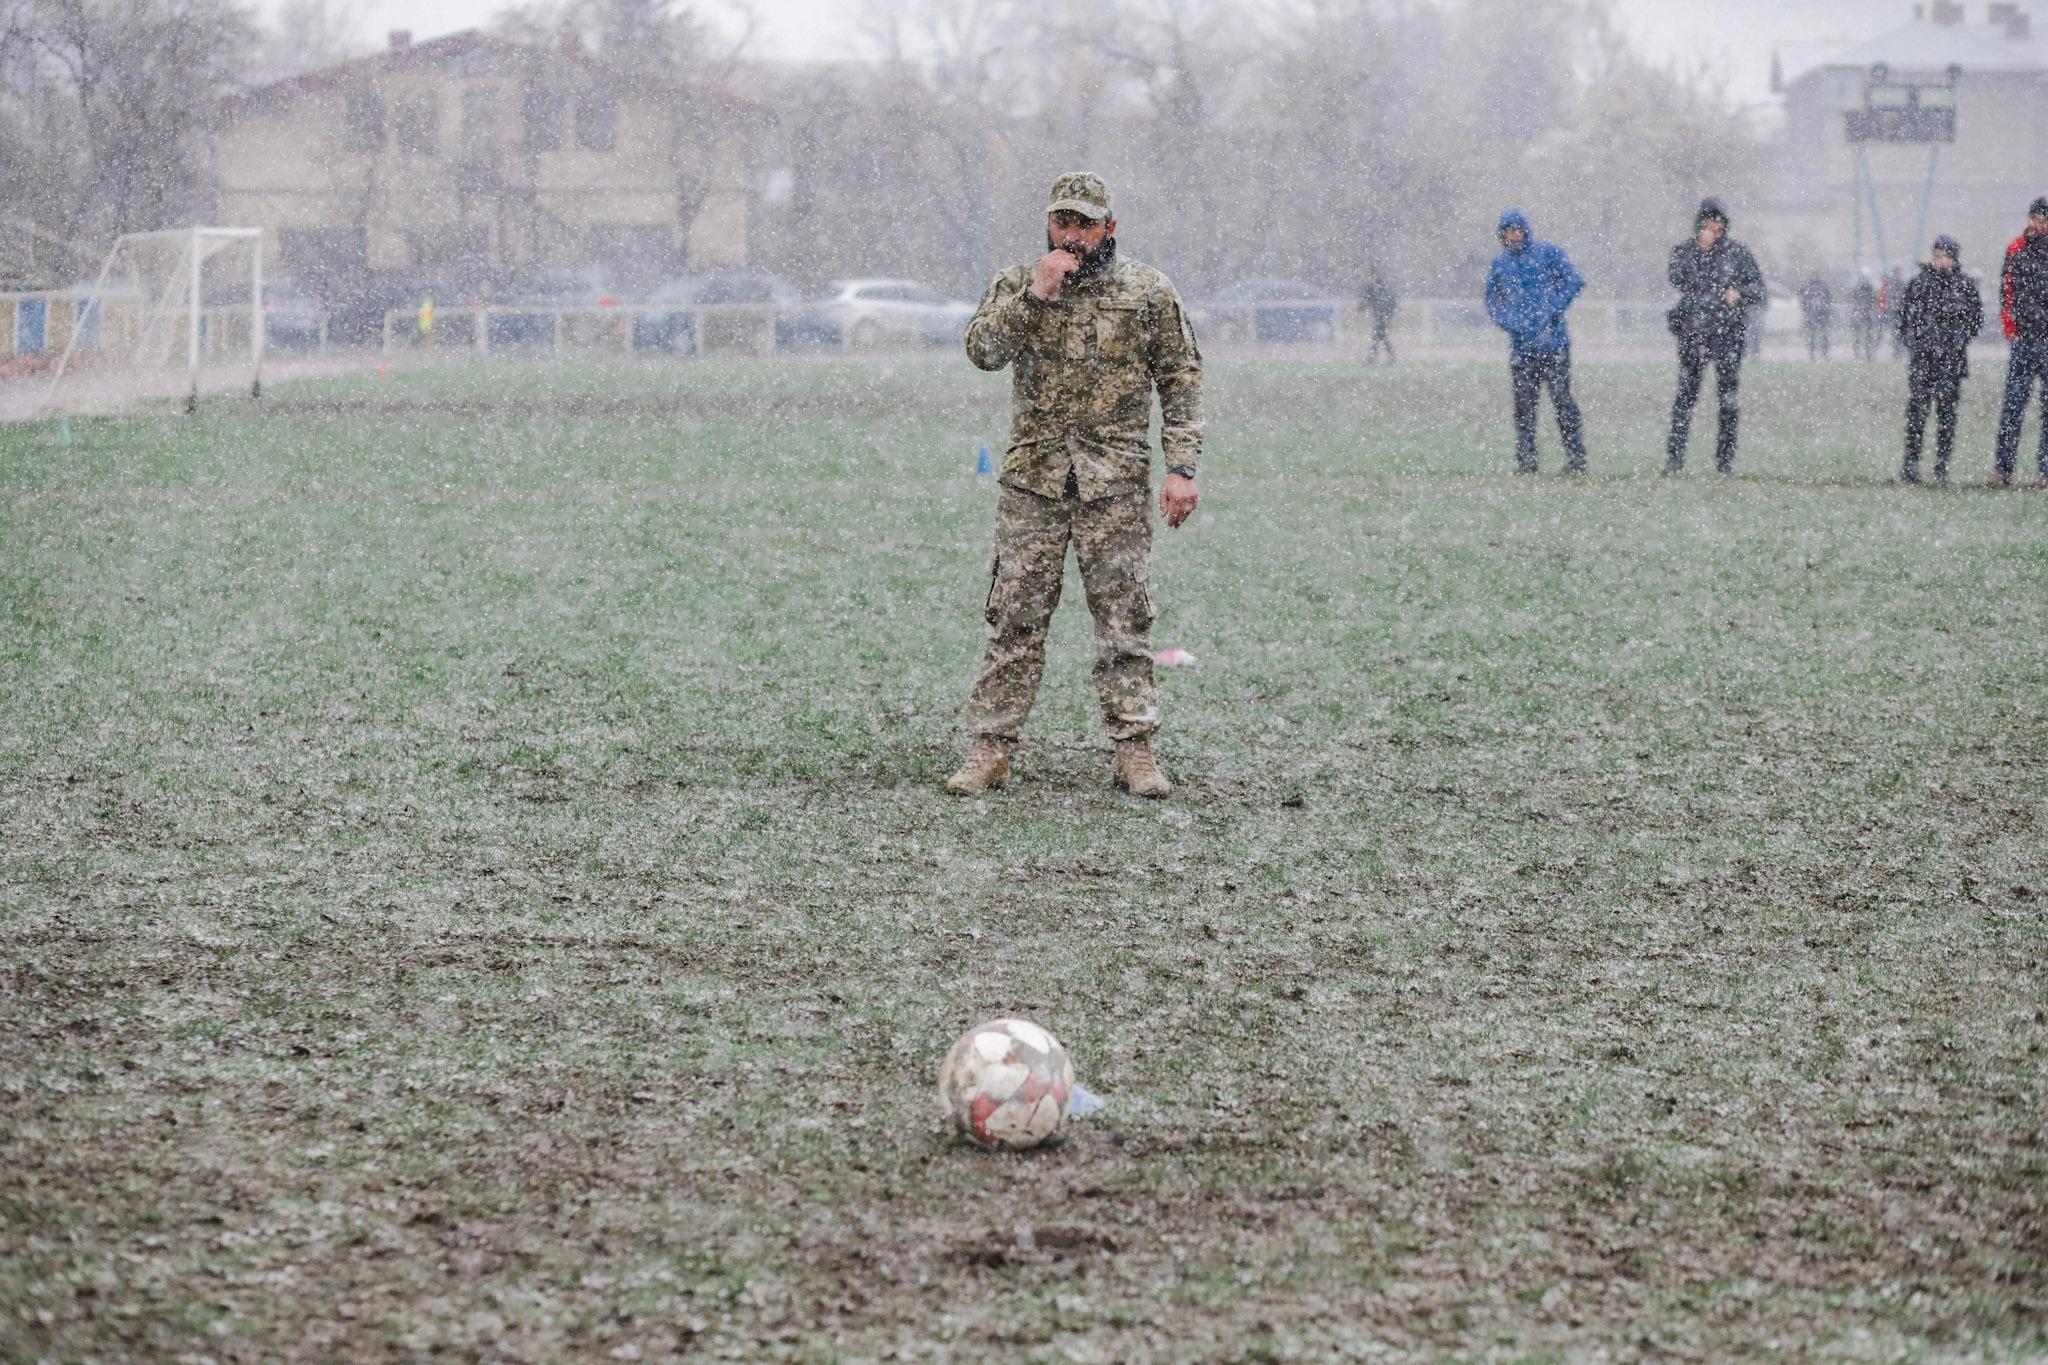 Anadolu/Getty - First vestige of football in Ukraine after more than 50 days of war